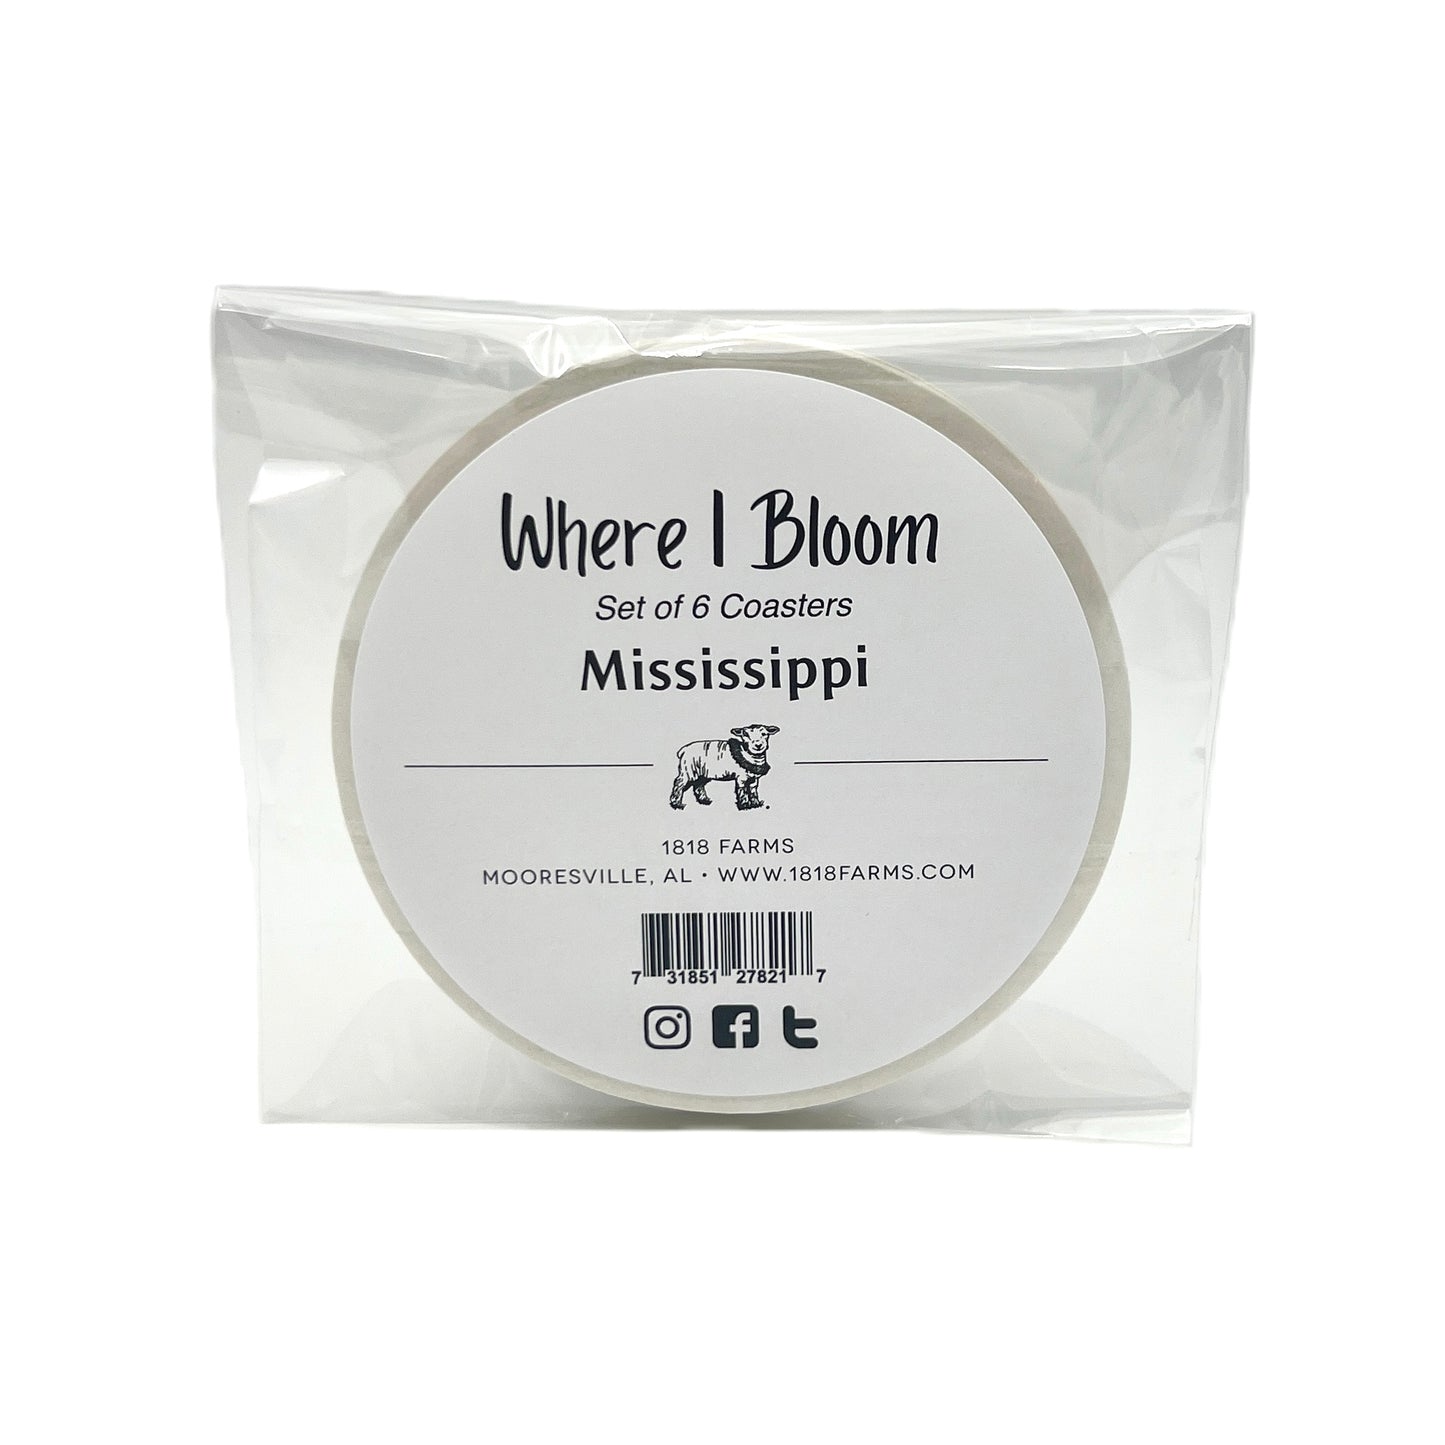 Mississippi Themed Coasters (Set of 6)  - "Where I Bloom" Collection Coaster 1818 Farms   